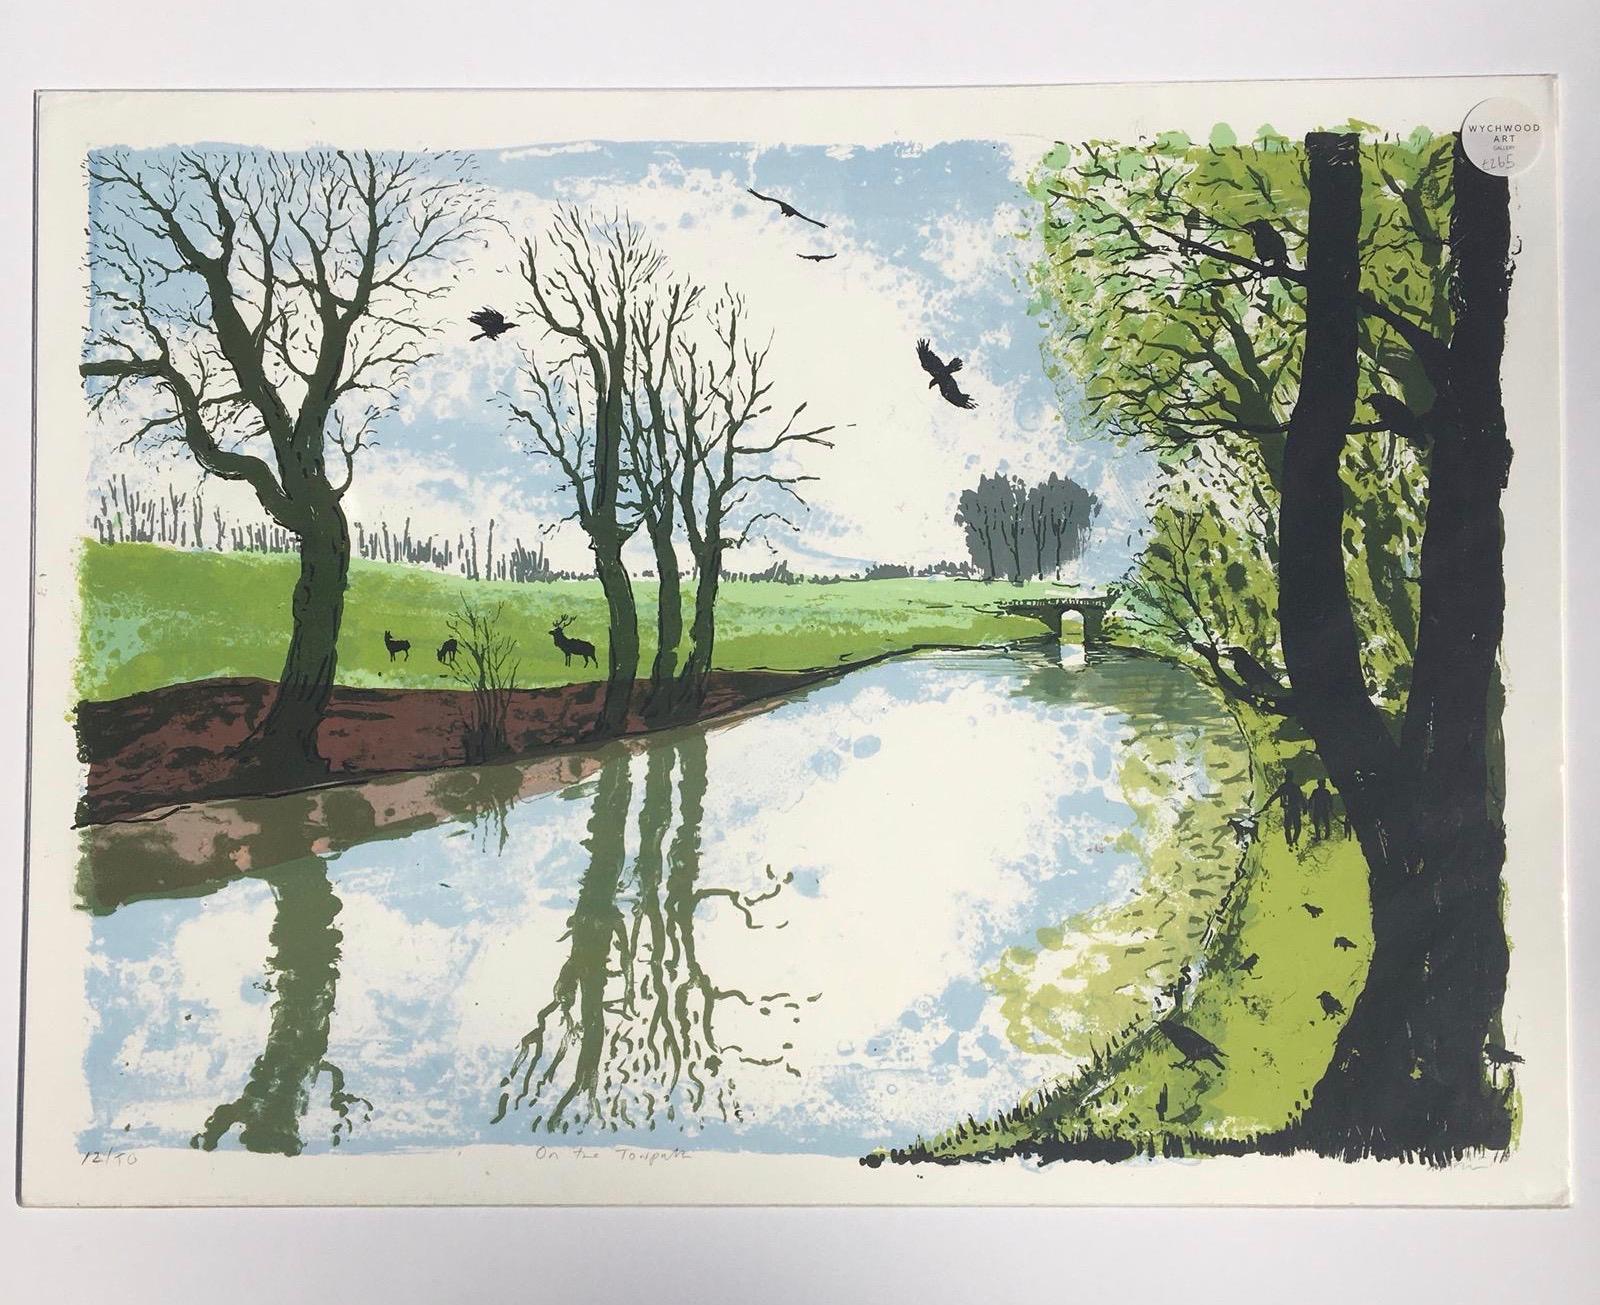 Tim Southall – A quiet, reflective image of a forgotten time. This 10 colour silkscreen is printed on Somerset Velvet, a heavyweight 300 gram handmade paper from St Cuthbert’s Mill in Somerset. The print is in a limited edition of 50.
Tim Southall